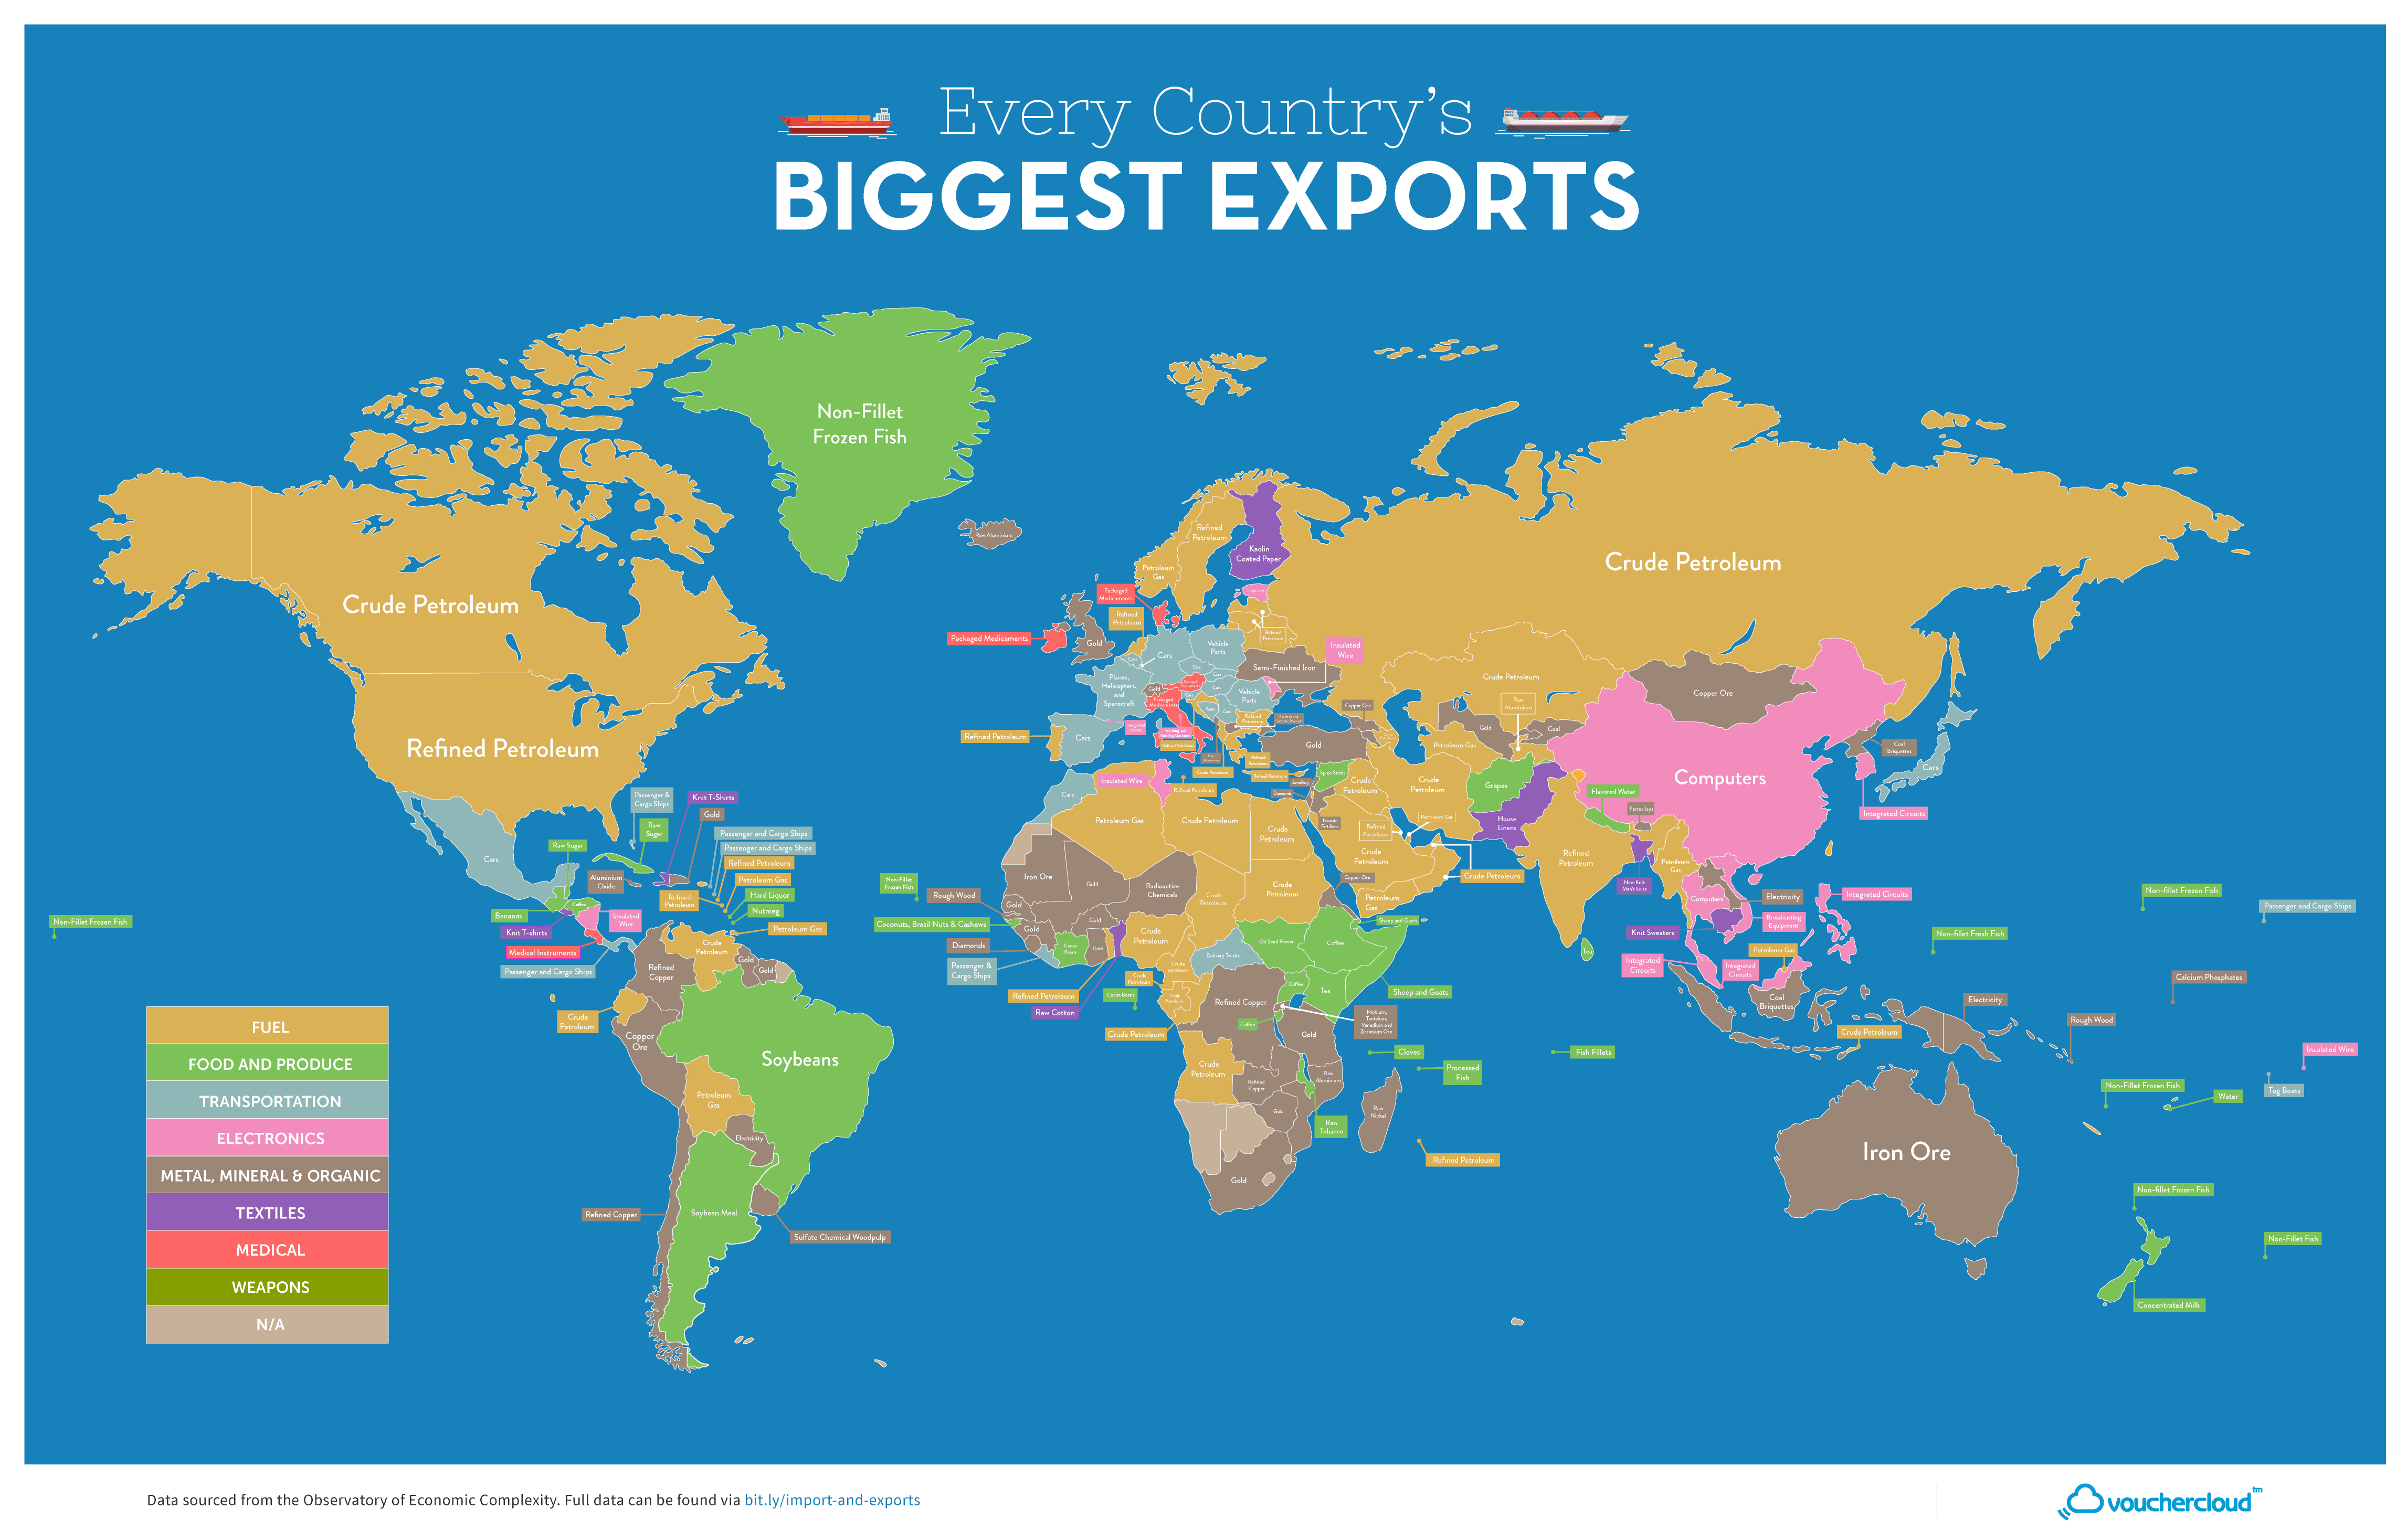 Mapping the Top Export of Every Country